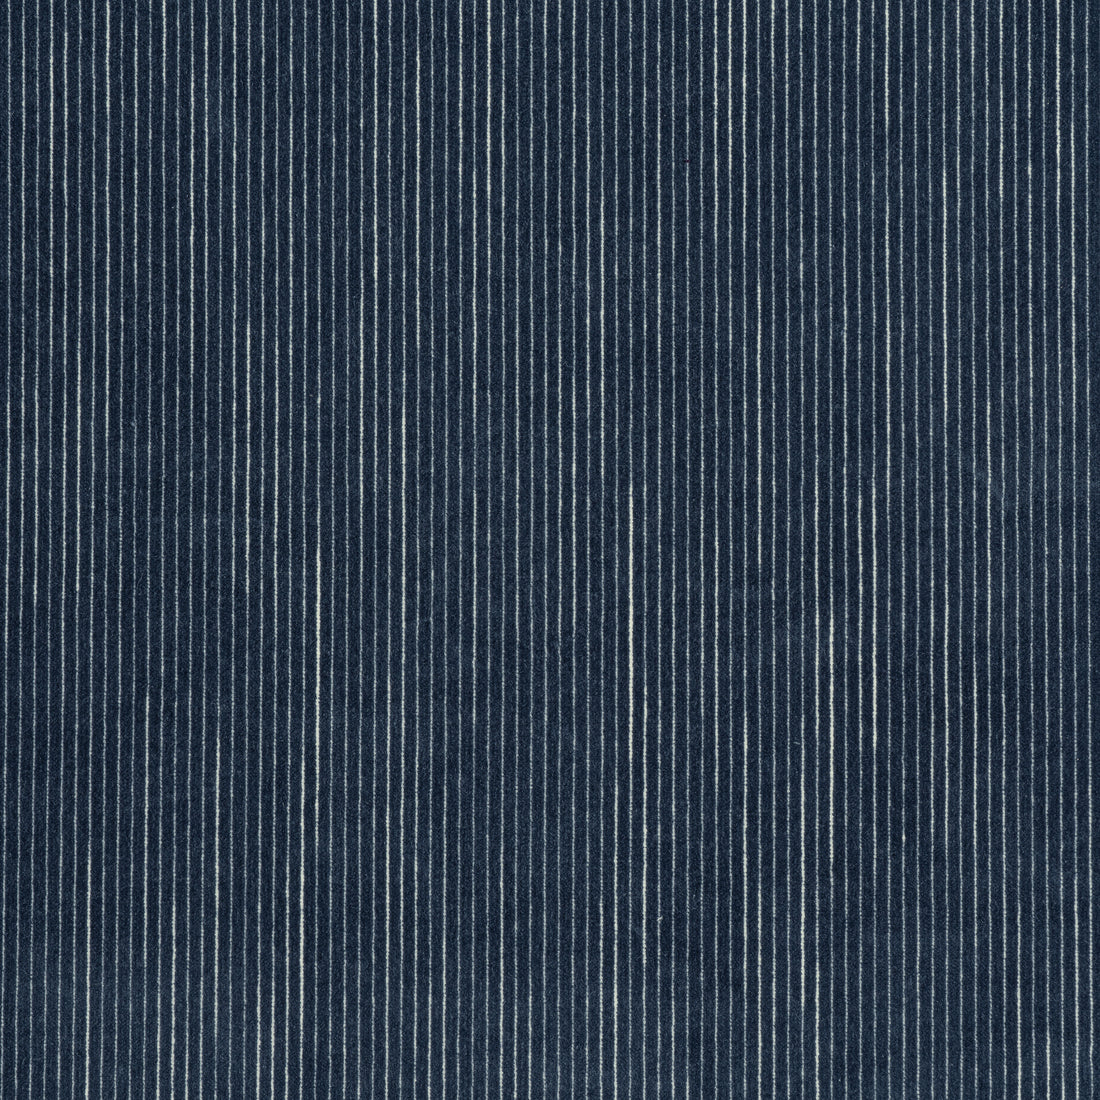 Fino Velvet fabric in navy color - pattern number W8153 - by Thibaut in the Sereno collection